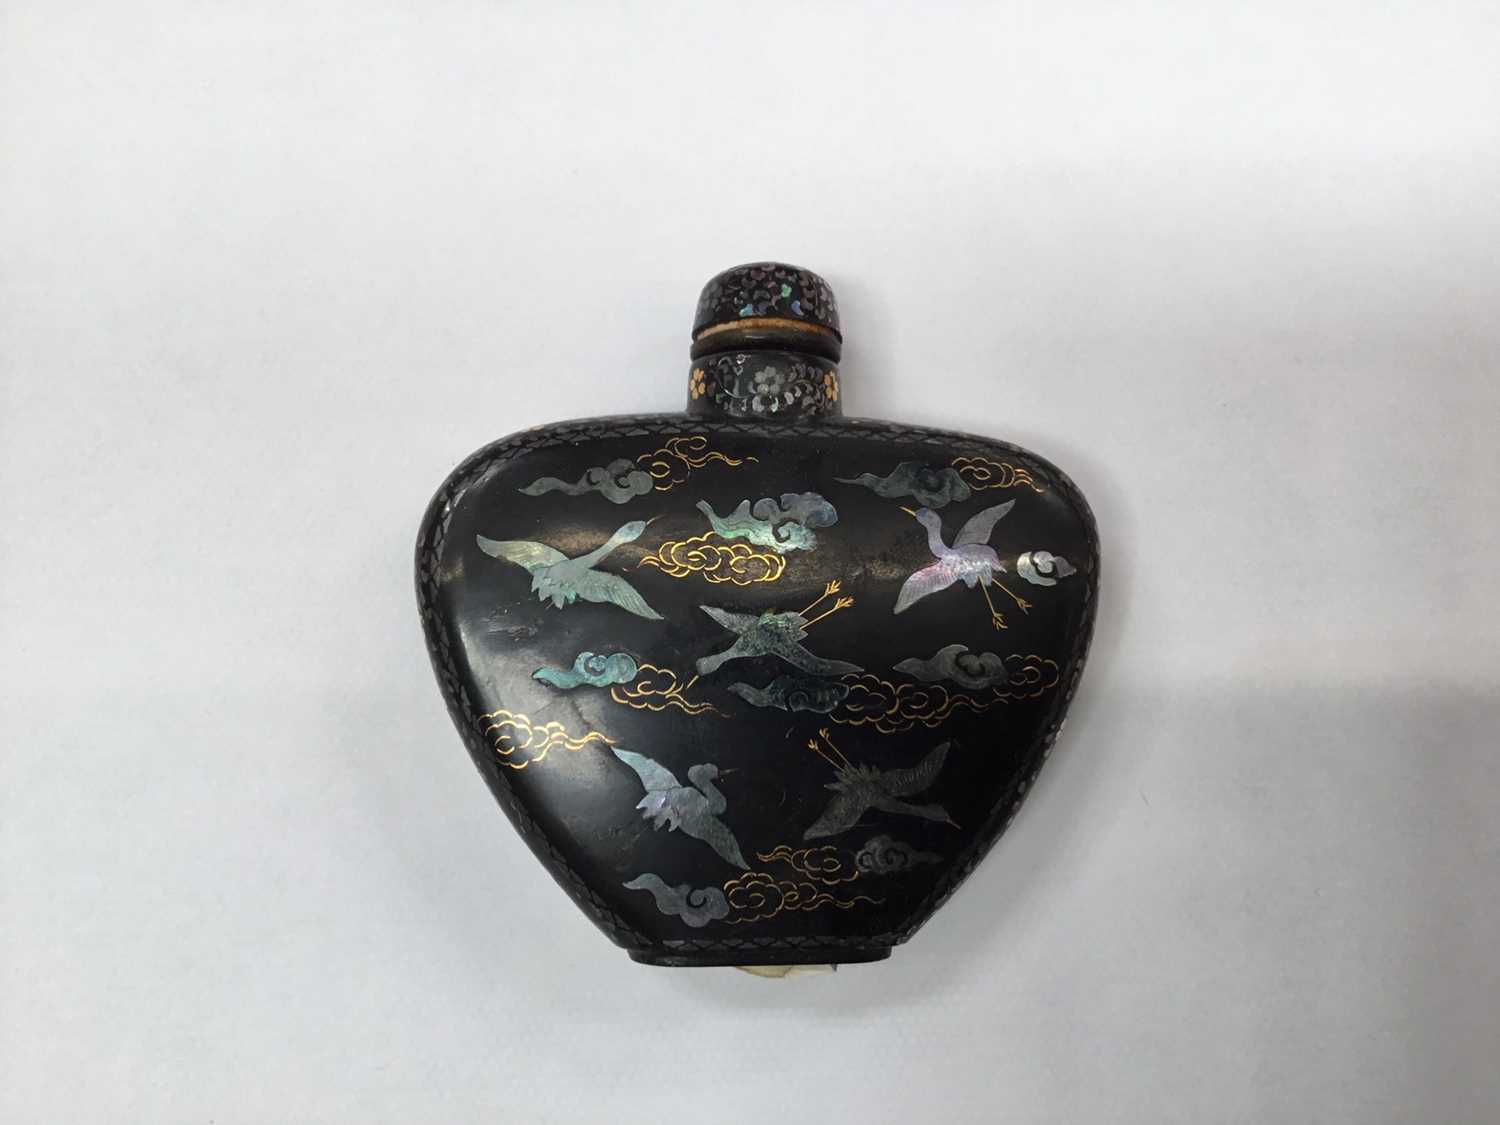 Japanese Meiji period lac burgaute metal inlaid heart shaped snuff bottle and stopper - Image 3 of 7